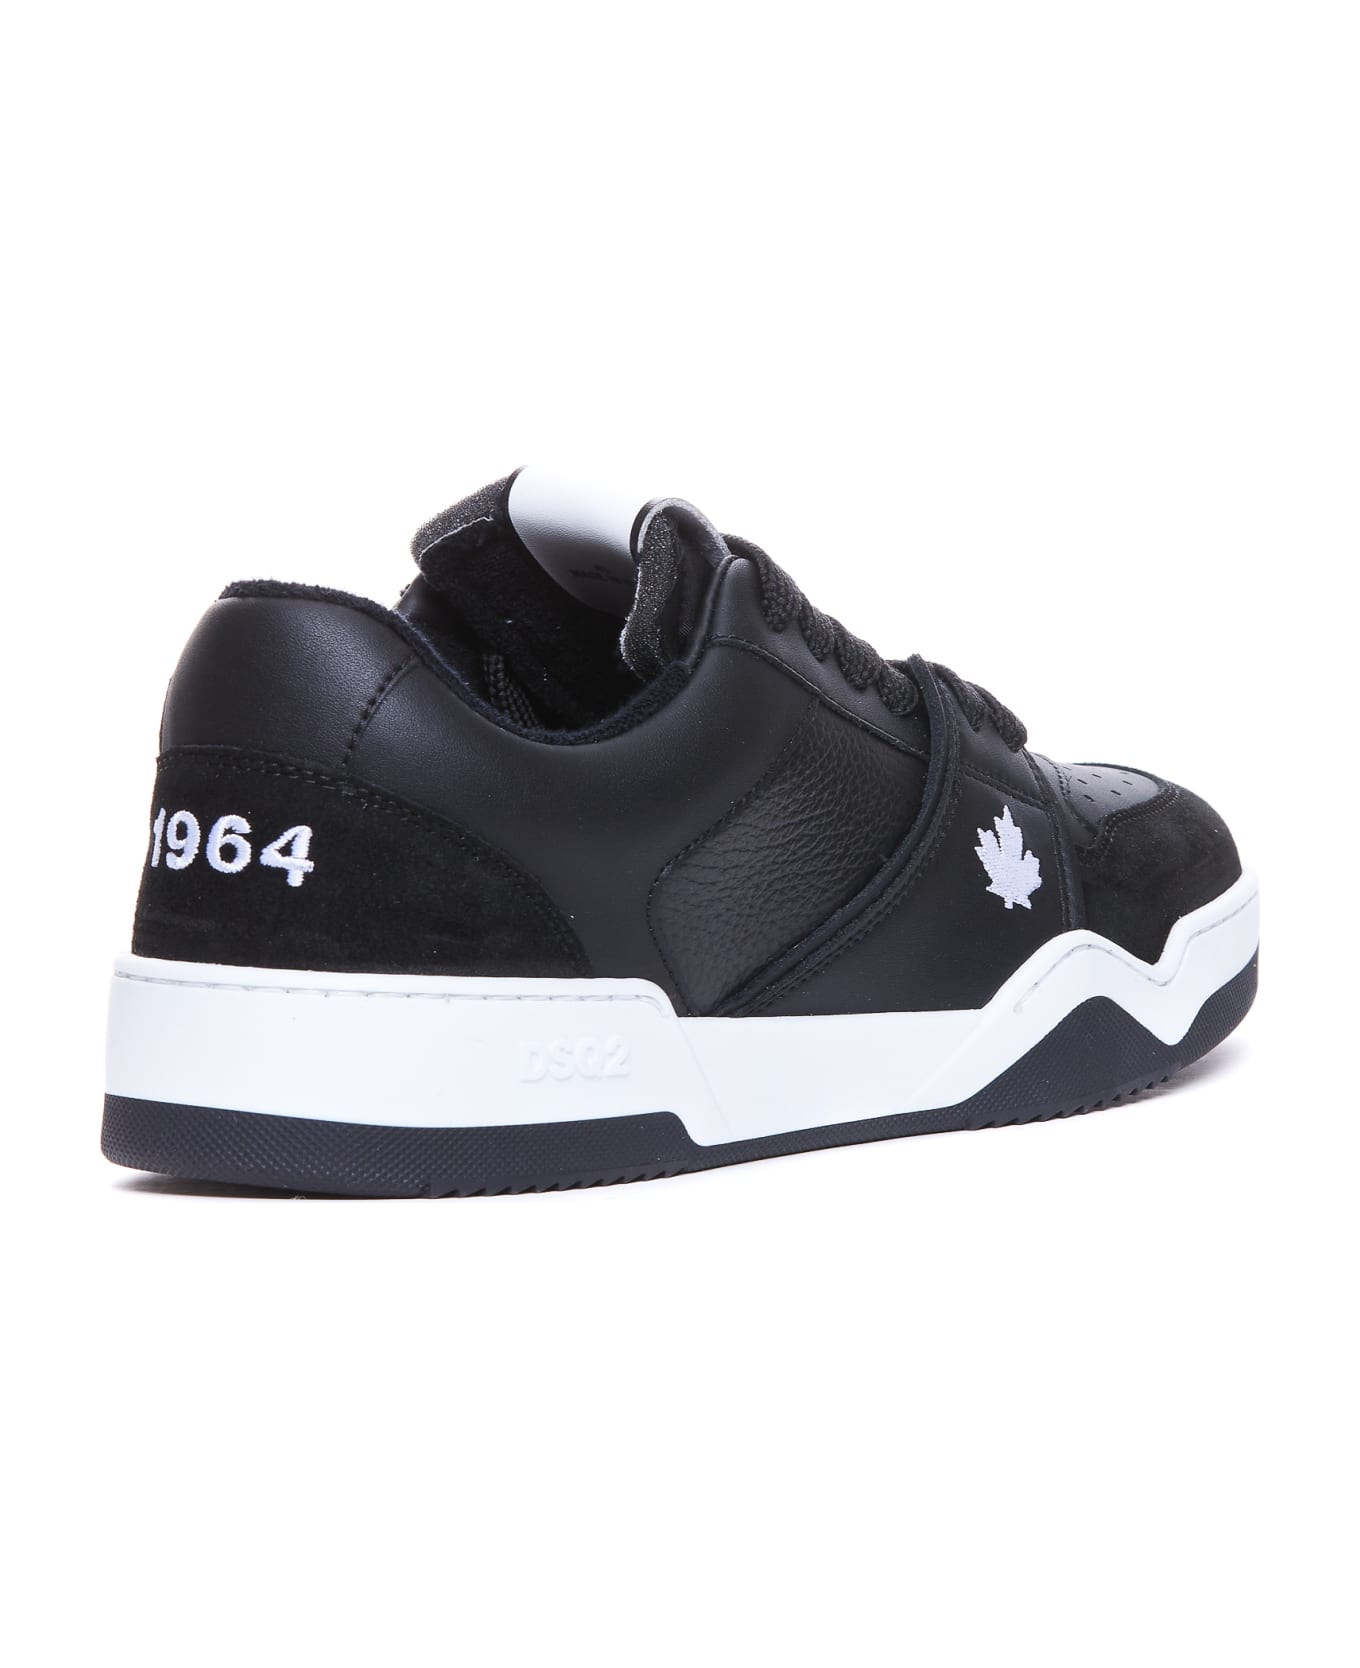 Dsquared2 Spiker Sneakers - Black